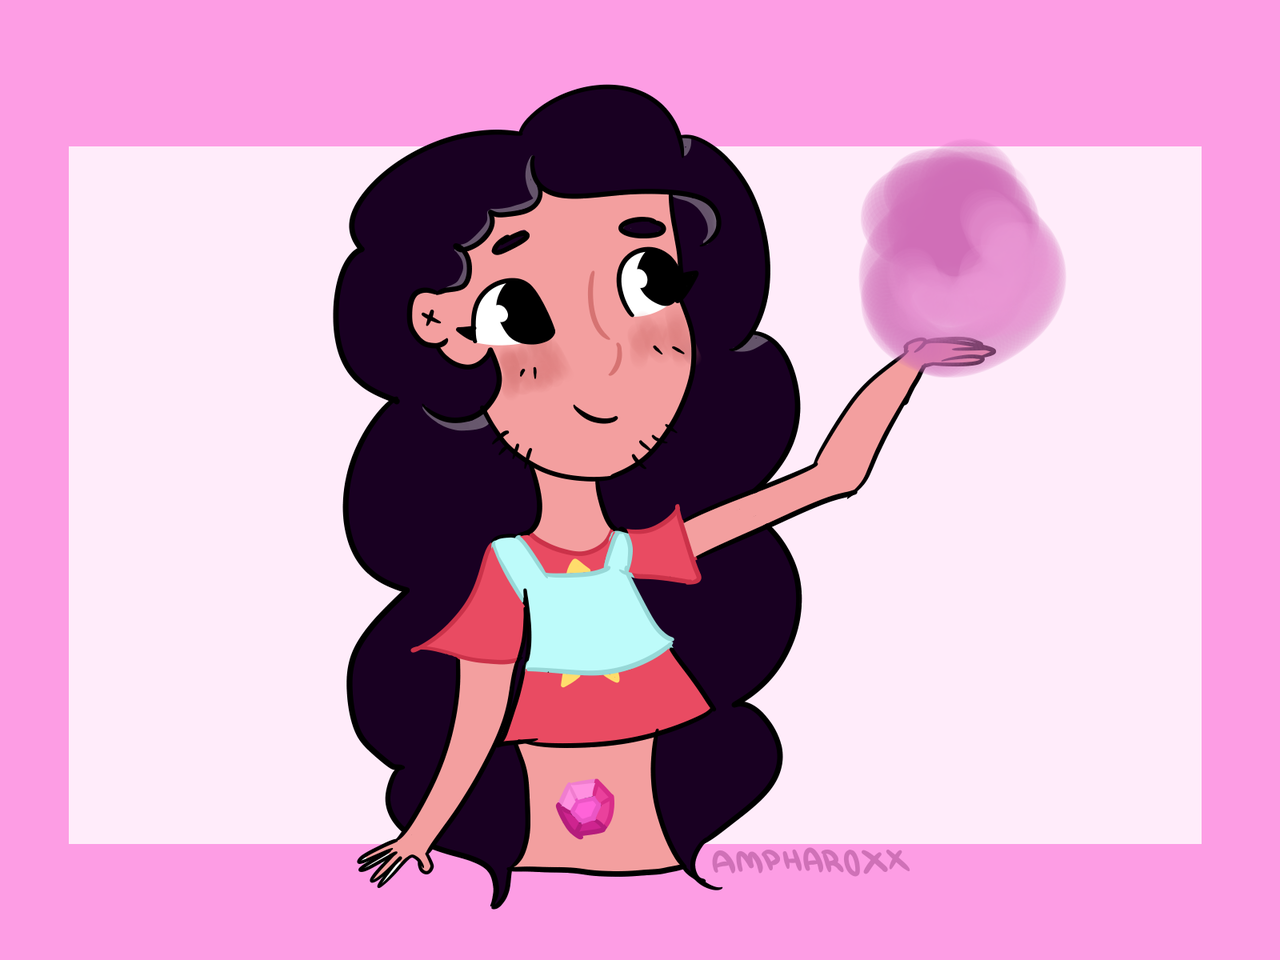 so y'all remember that one stevonnie piece I did like half a year ago??? yeah me neither but heres a redraw anyway